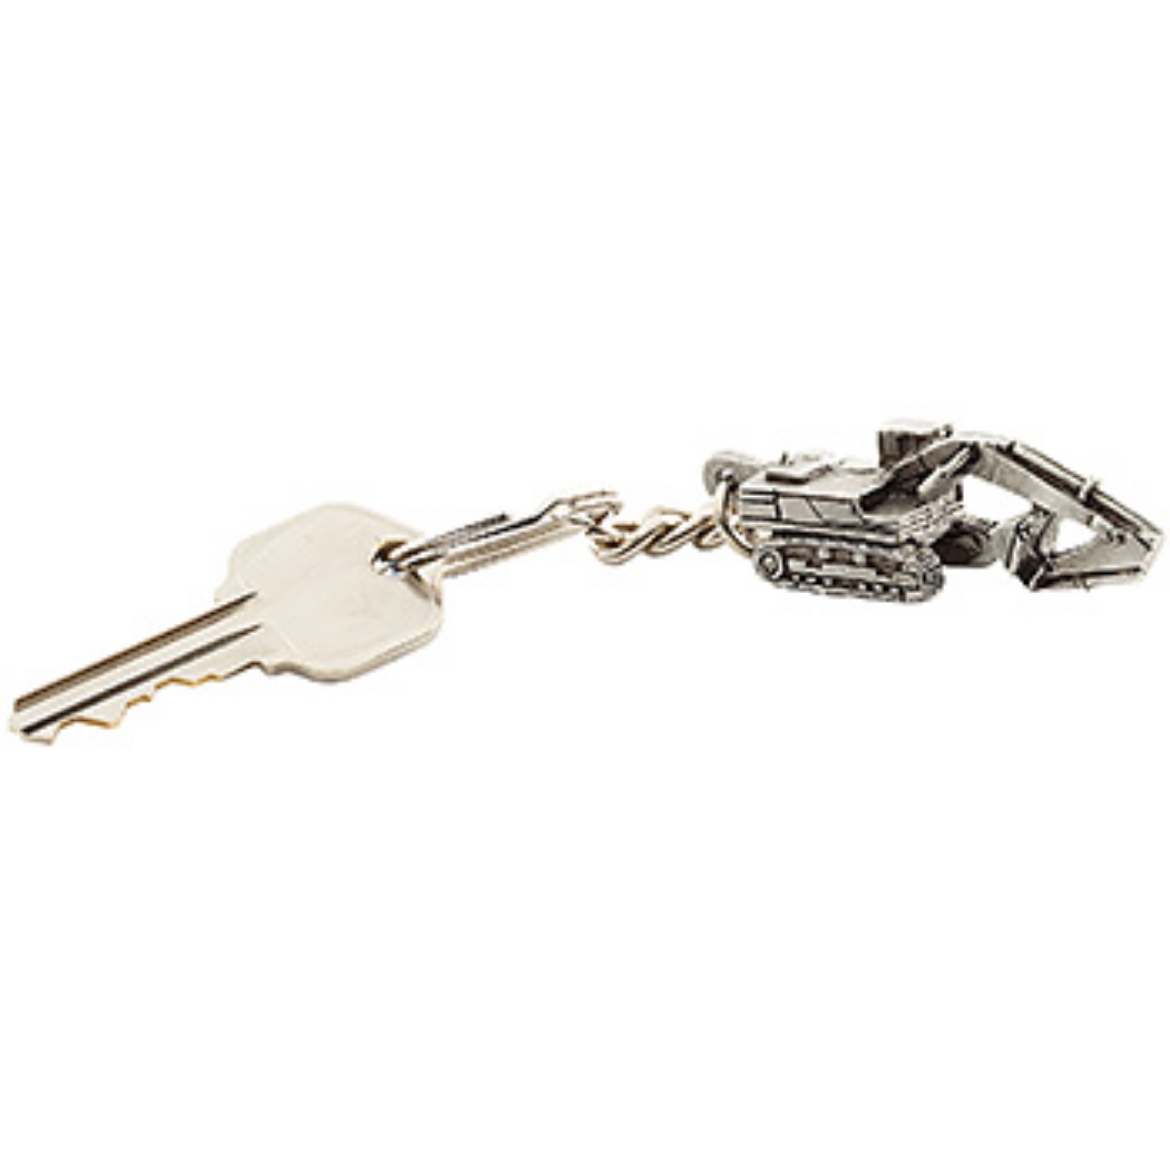 Picture of 320D Hydraulic Excavator Pewter Replica Key Tag